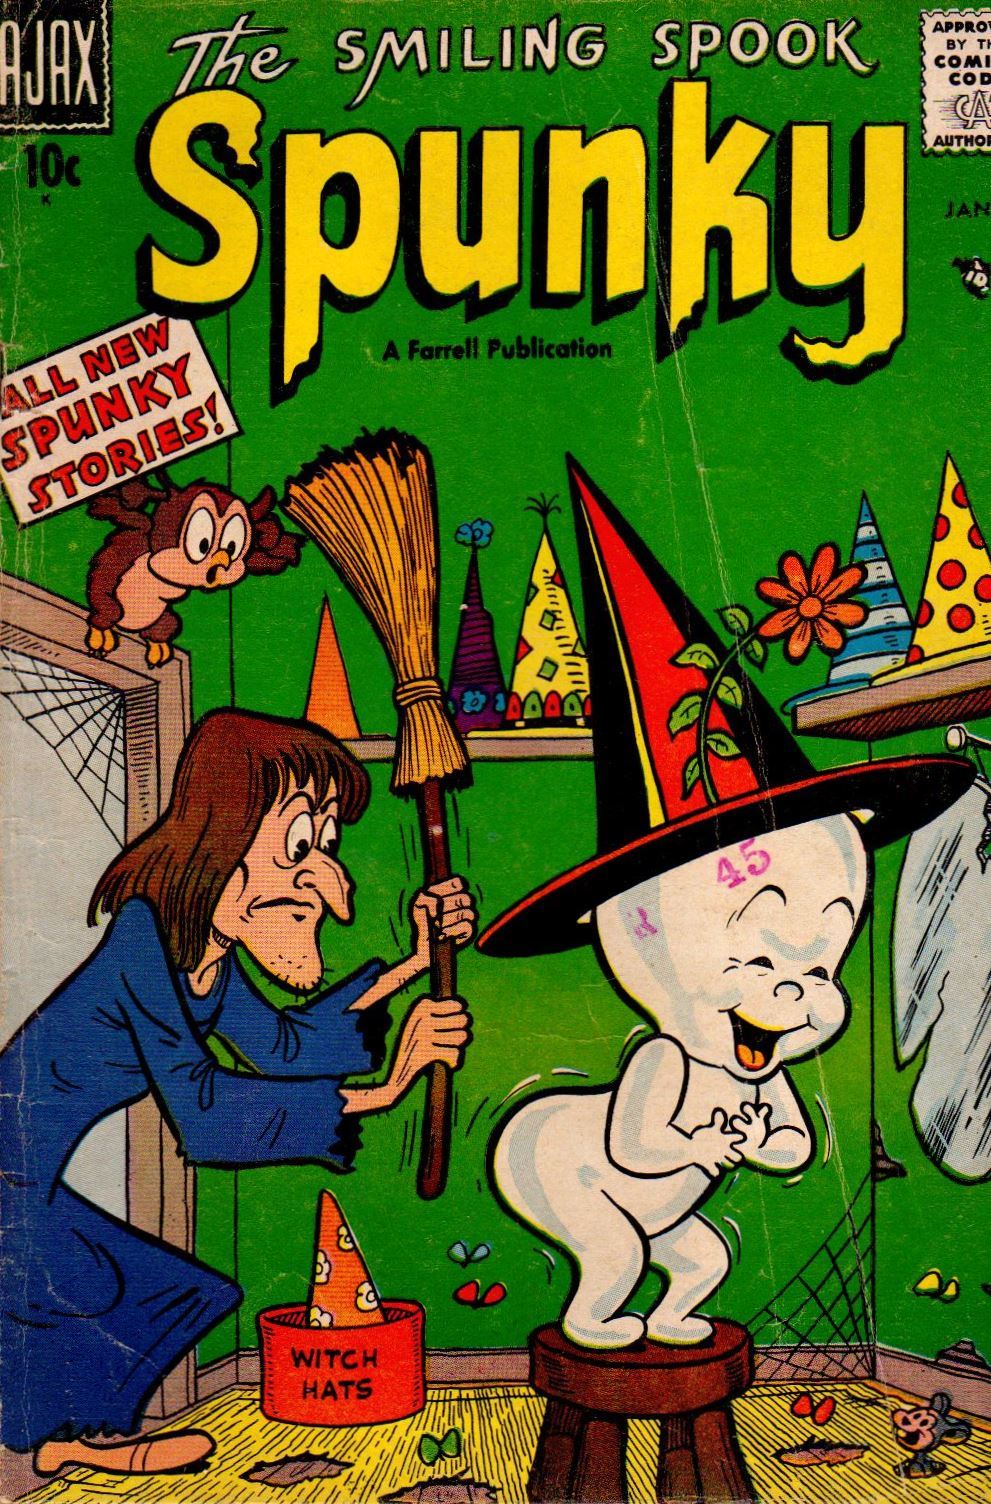 Porn comicbookcovers:Spunky, The Smiling Spook photos